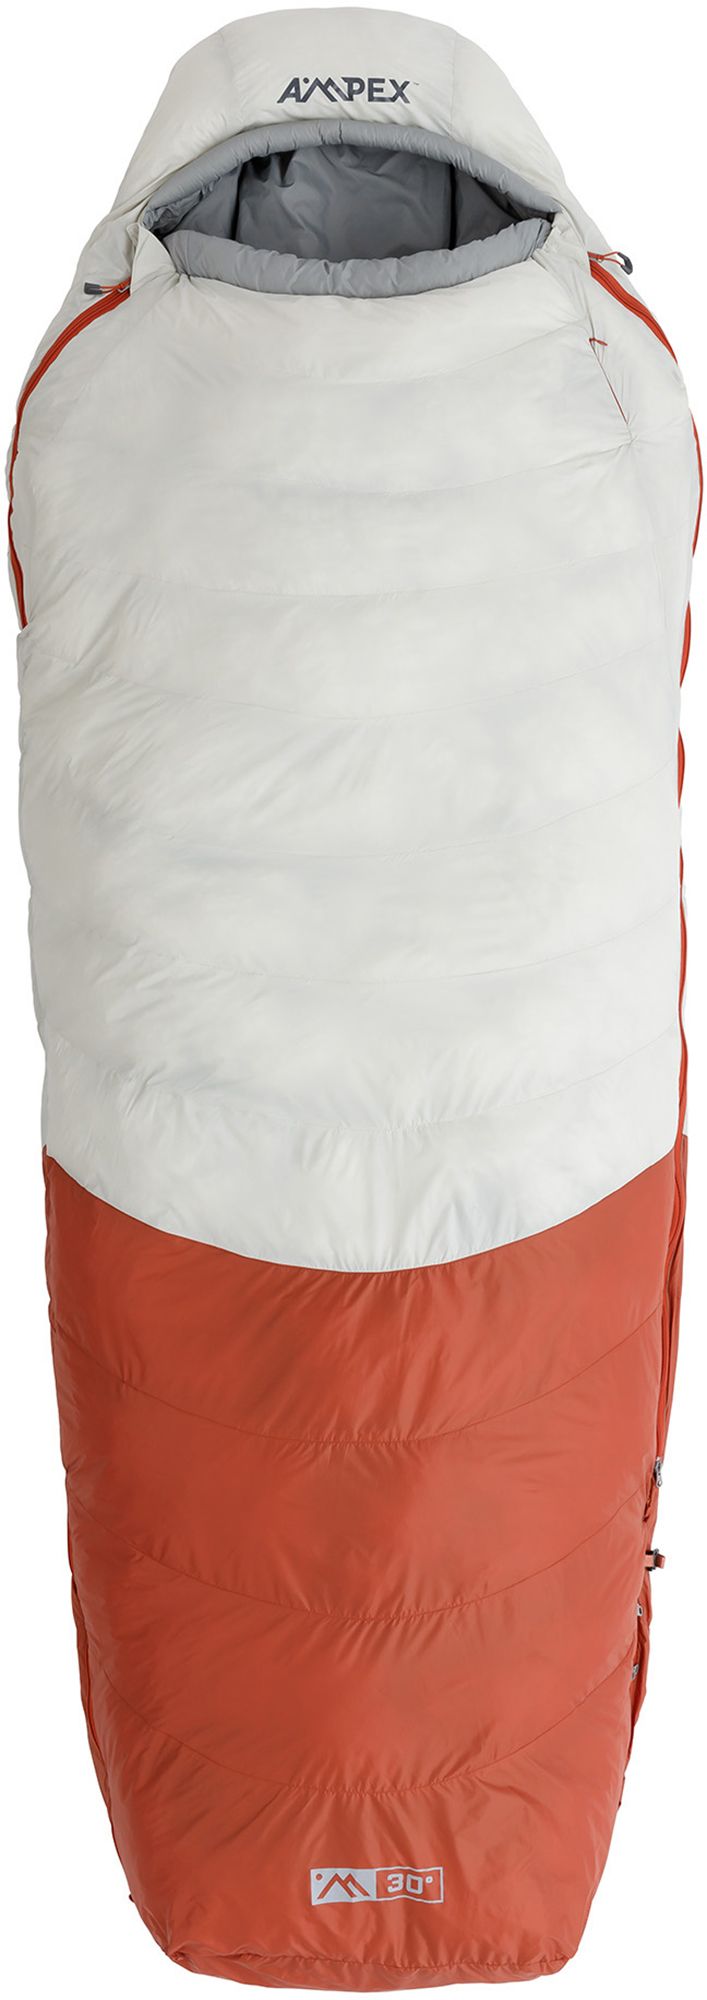 Photos - Suitcase / Backpack Cover AMPEX Hybrid Sleeping Bag 30- Long Wide, Men's, White/Red/Grey 23RDWU30FHY